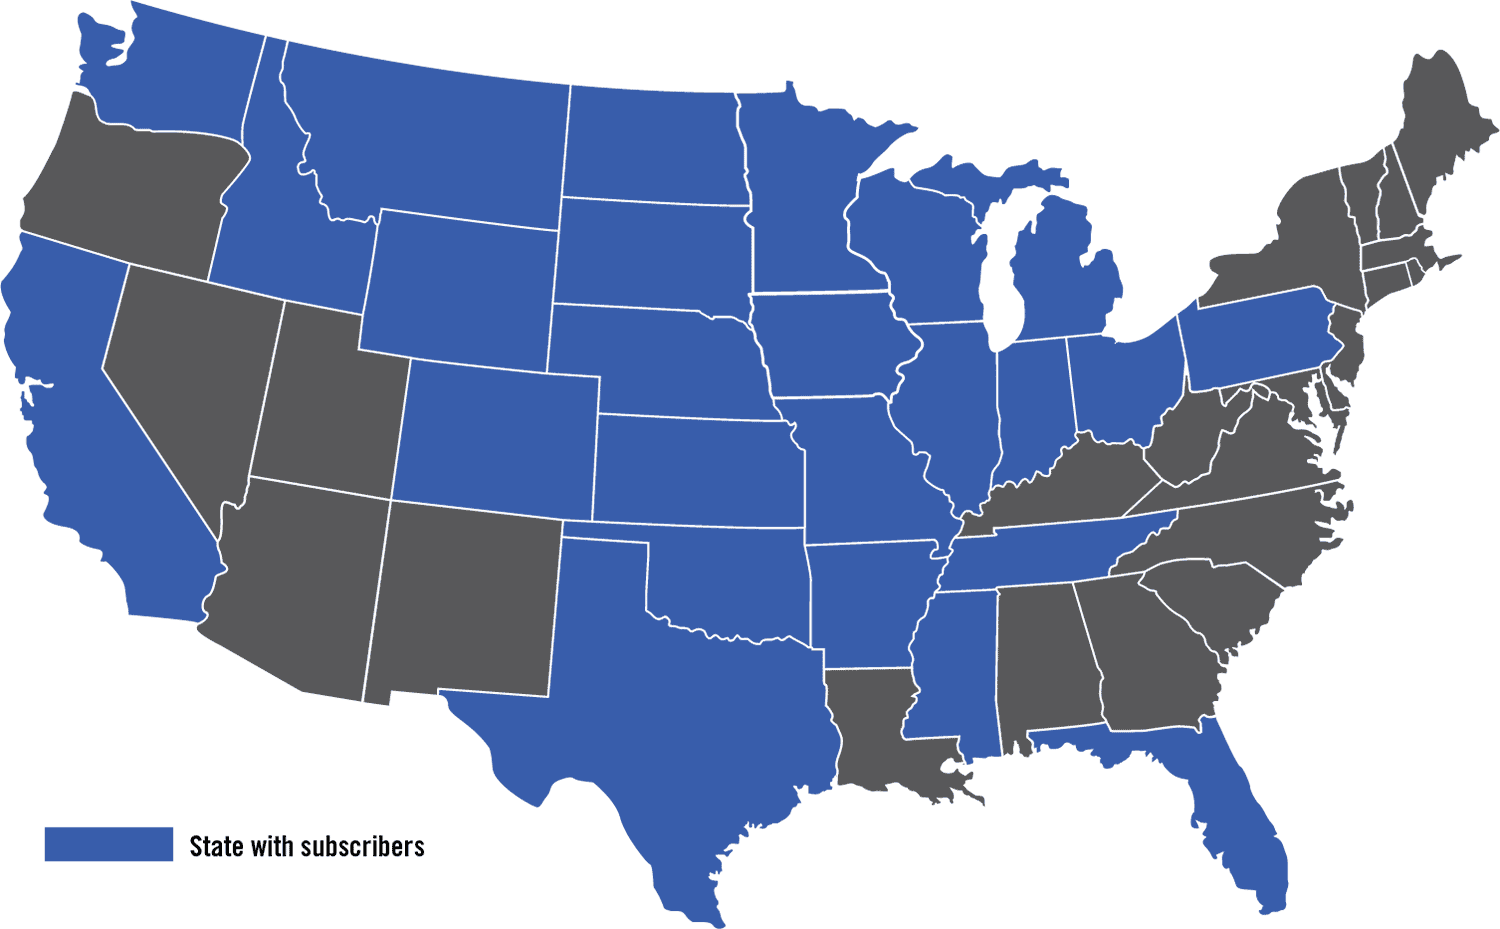 US map with shaded states indicating subscriber base